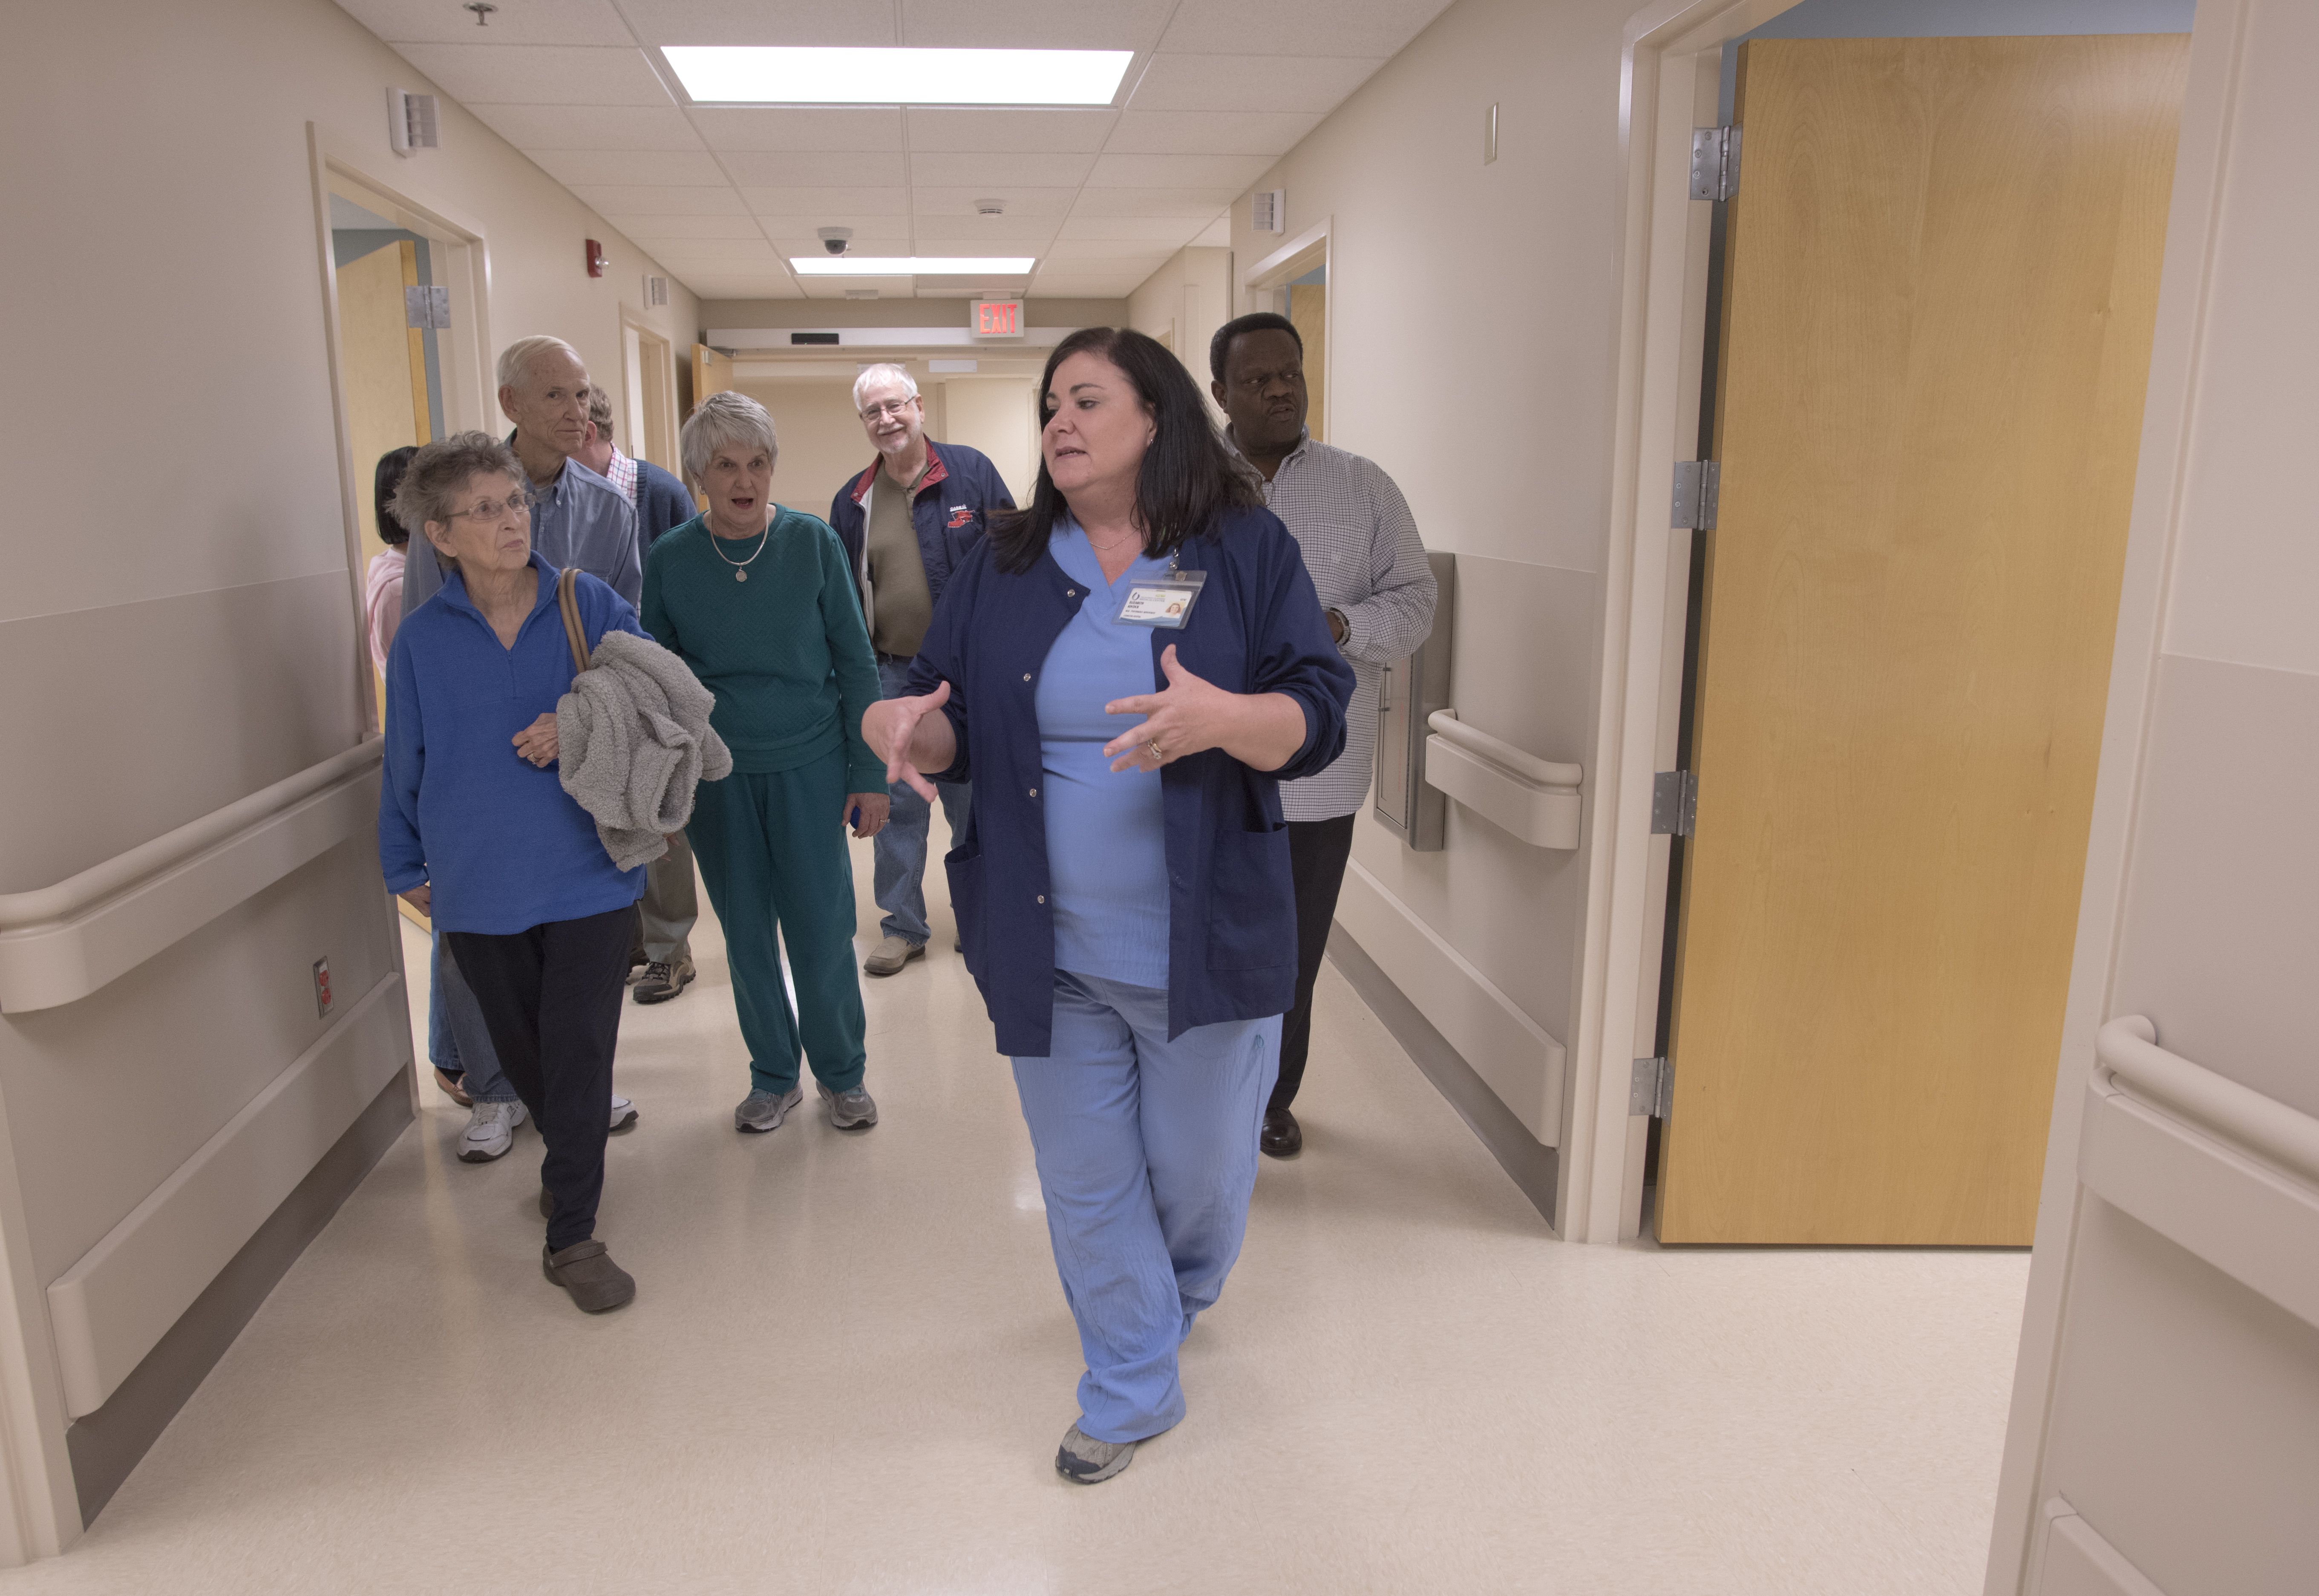 Elizabeth Adcock, manager of performance improvement at UMMC Holmes County, shows off the Lexington hospital's new Emergency Department to a crowd of local residents during a Jan. 15 open house.